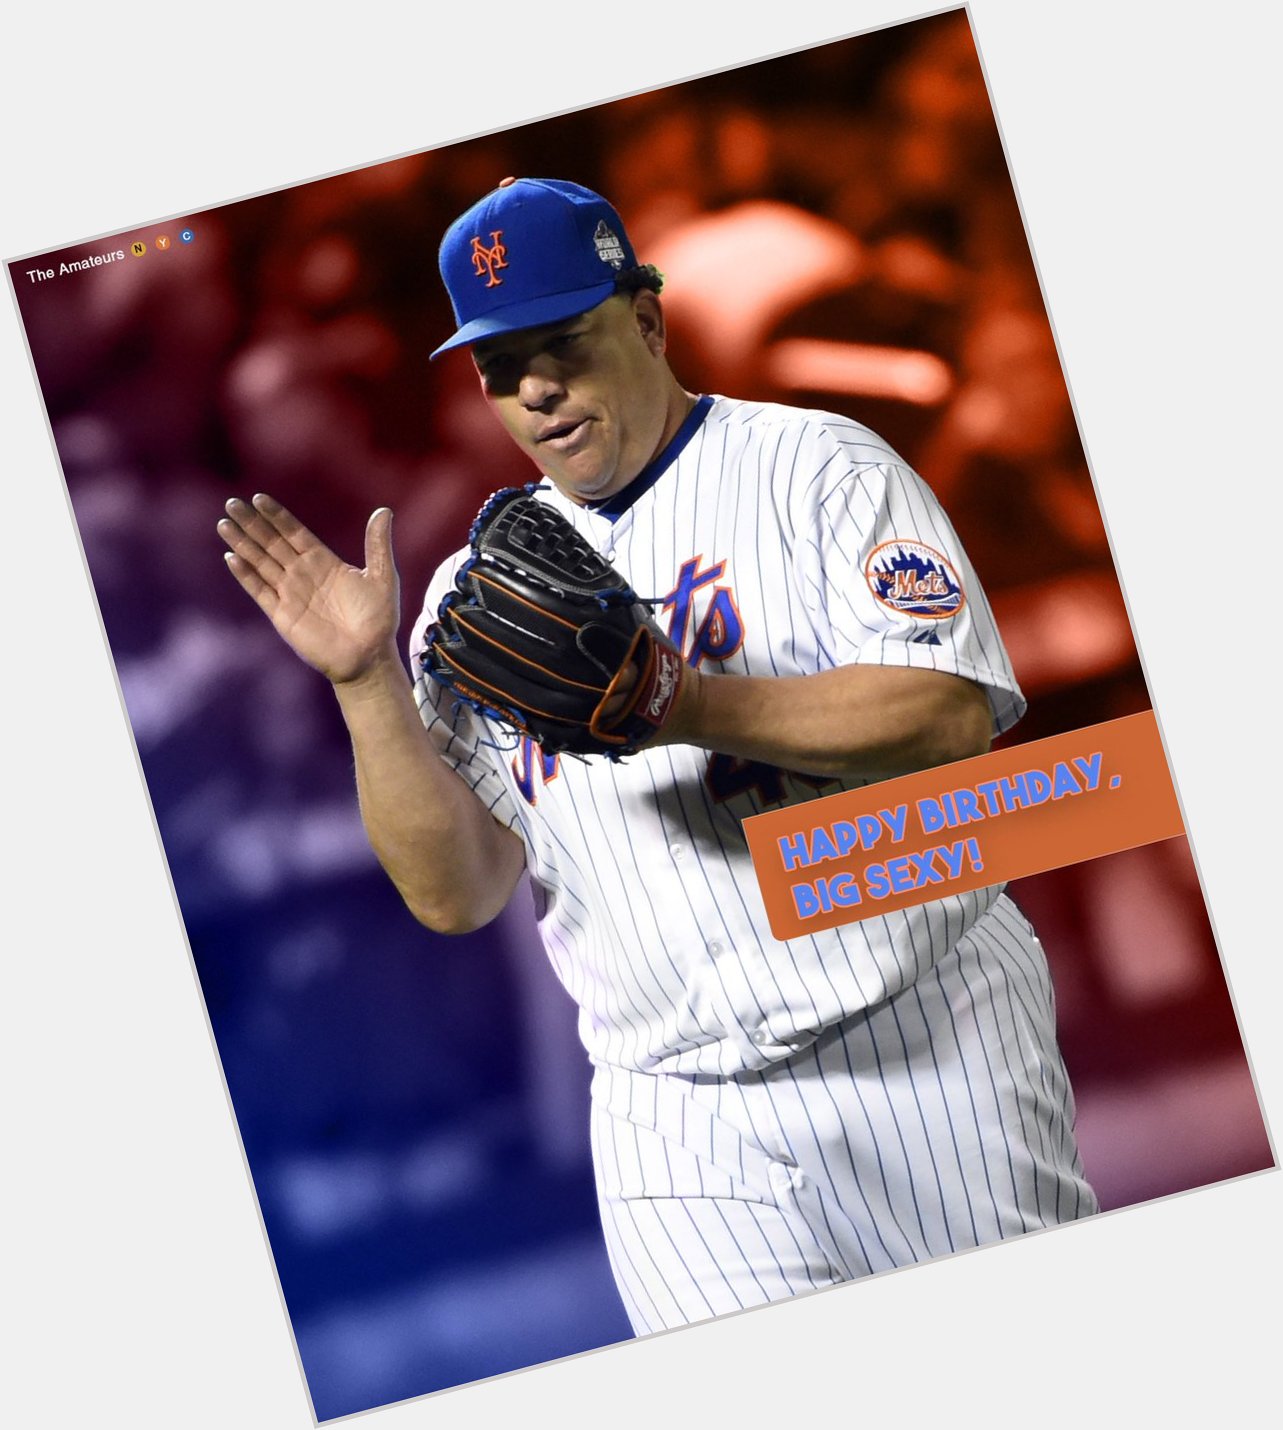 Happy Birthday to Bartolo Colon! fans do you think the Wilpons will cheap out on this fan favorite? 